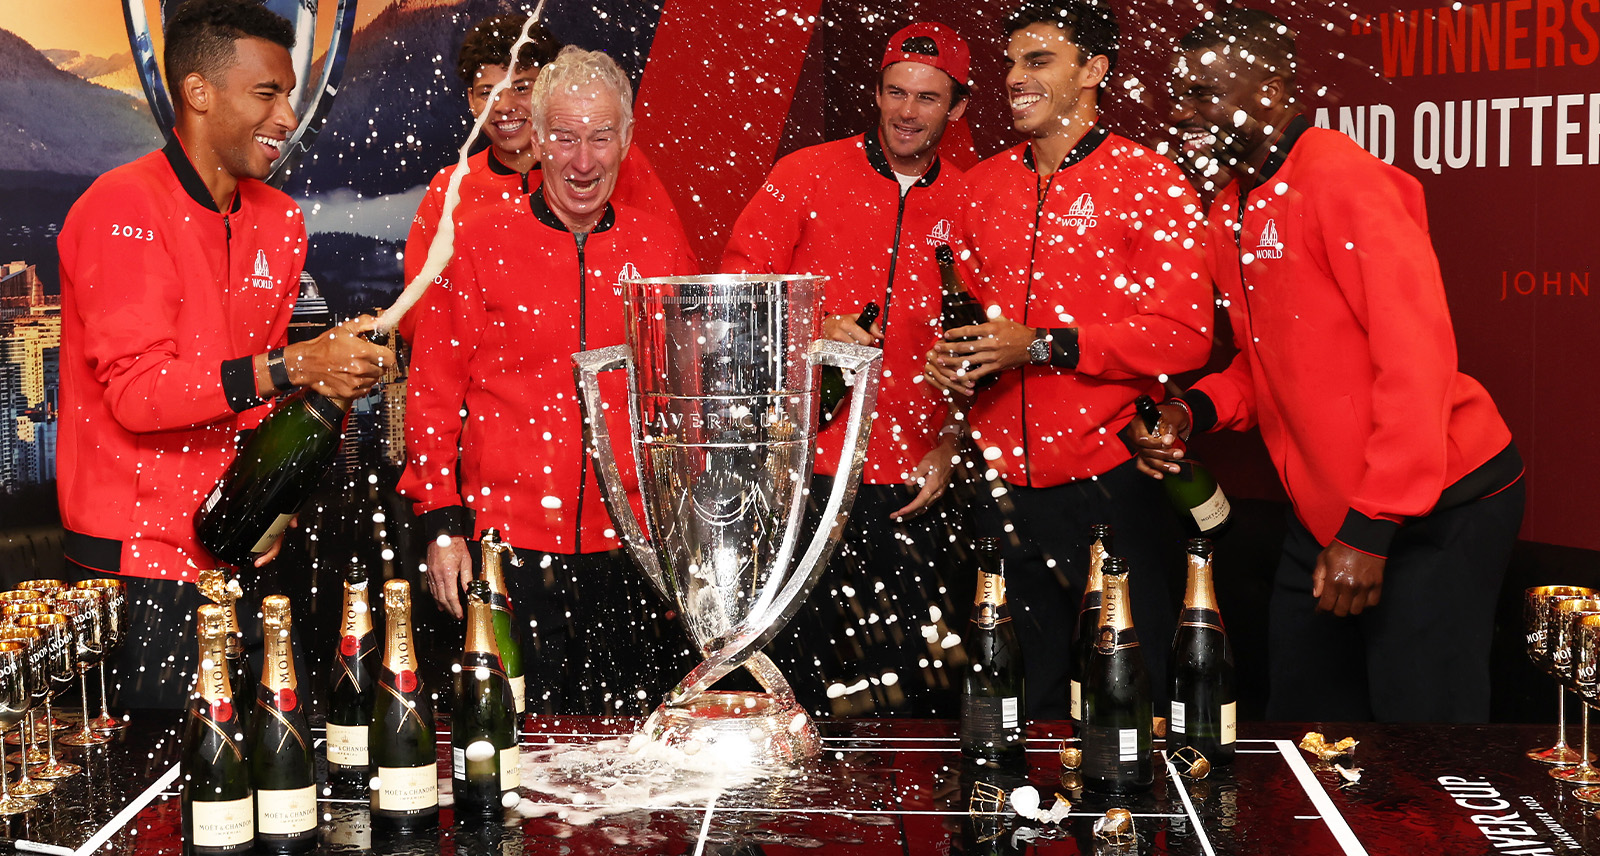 Laver Cup in Vancouver, players celebrating with Moet & Chandon champagne